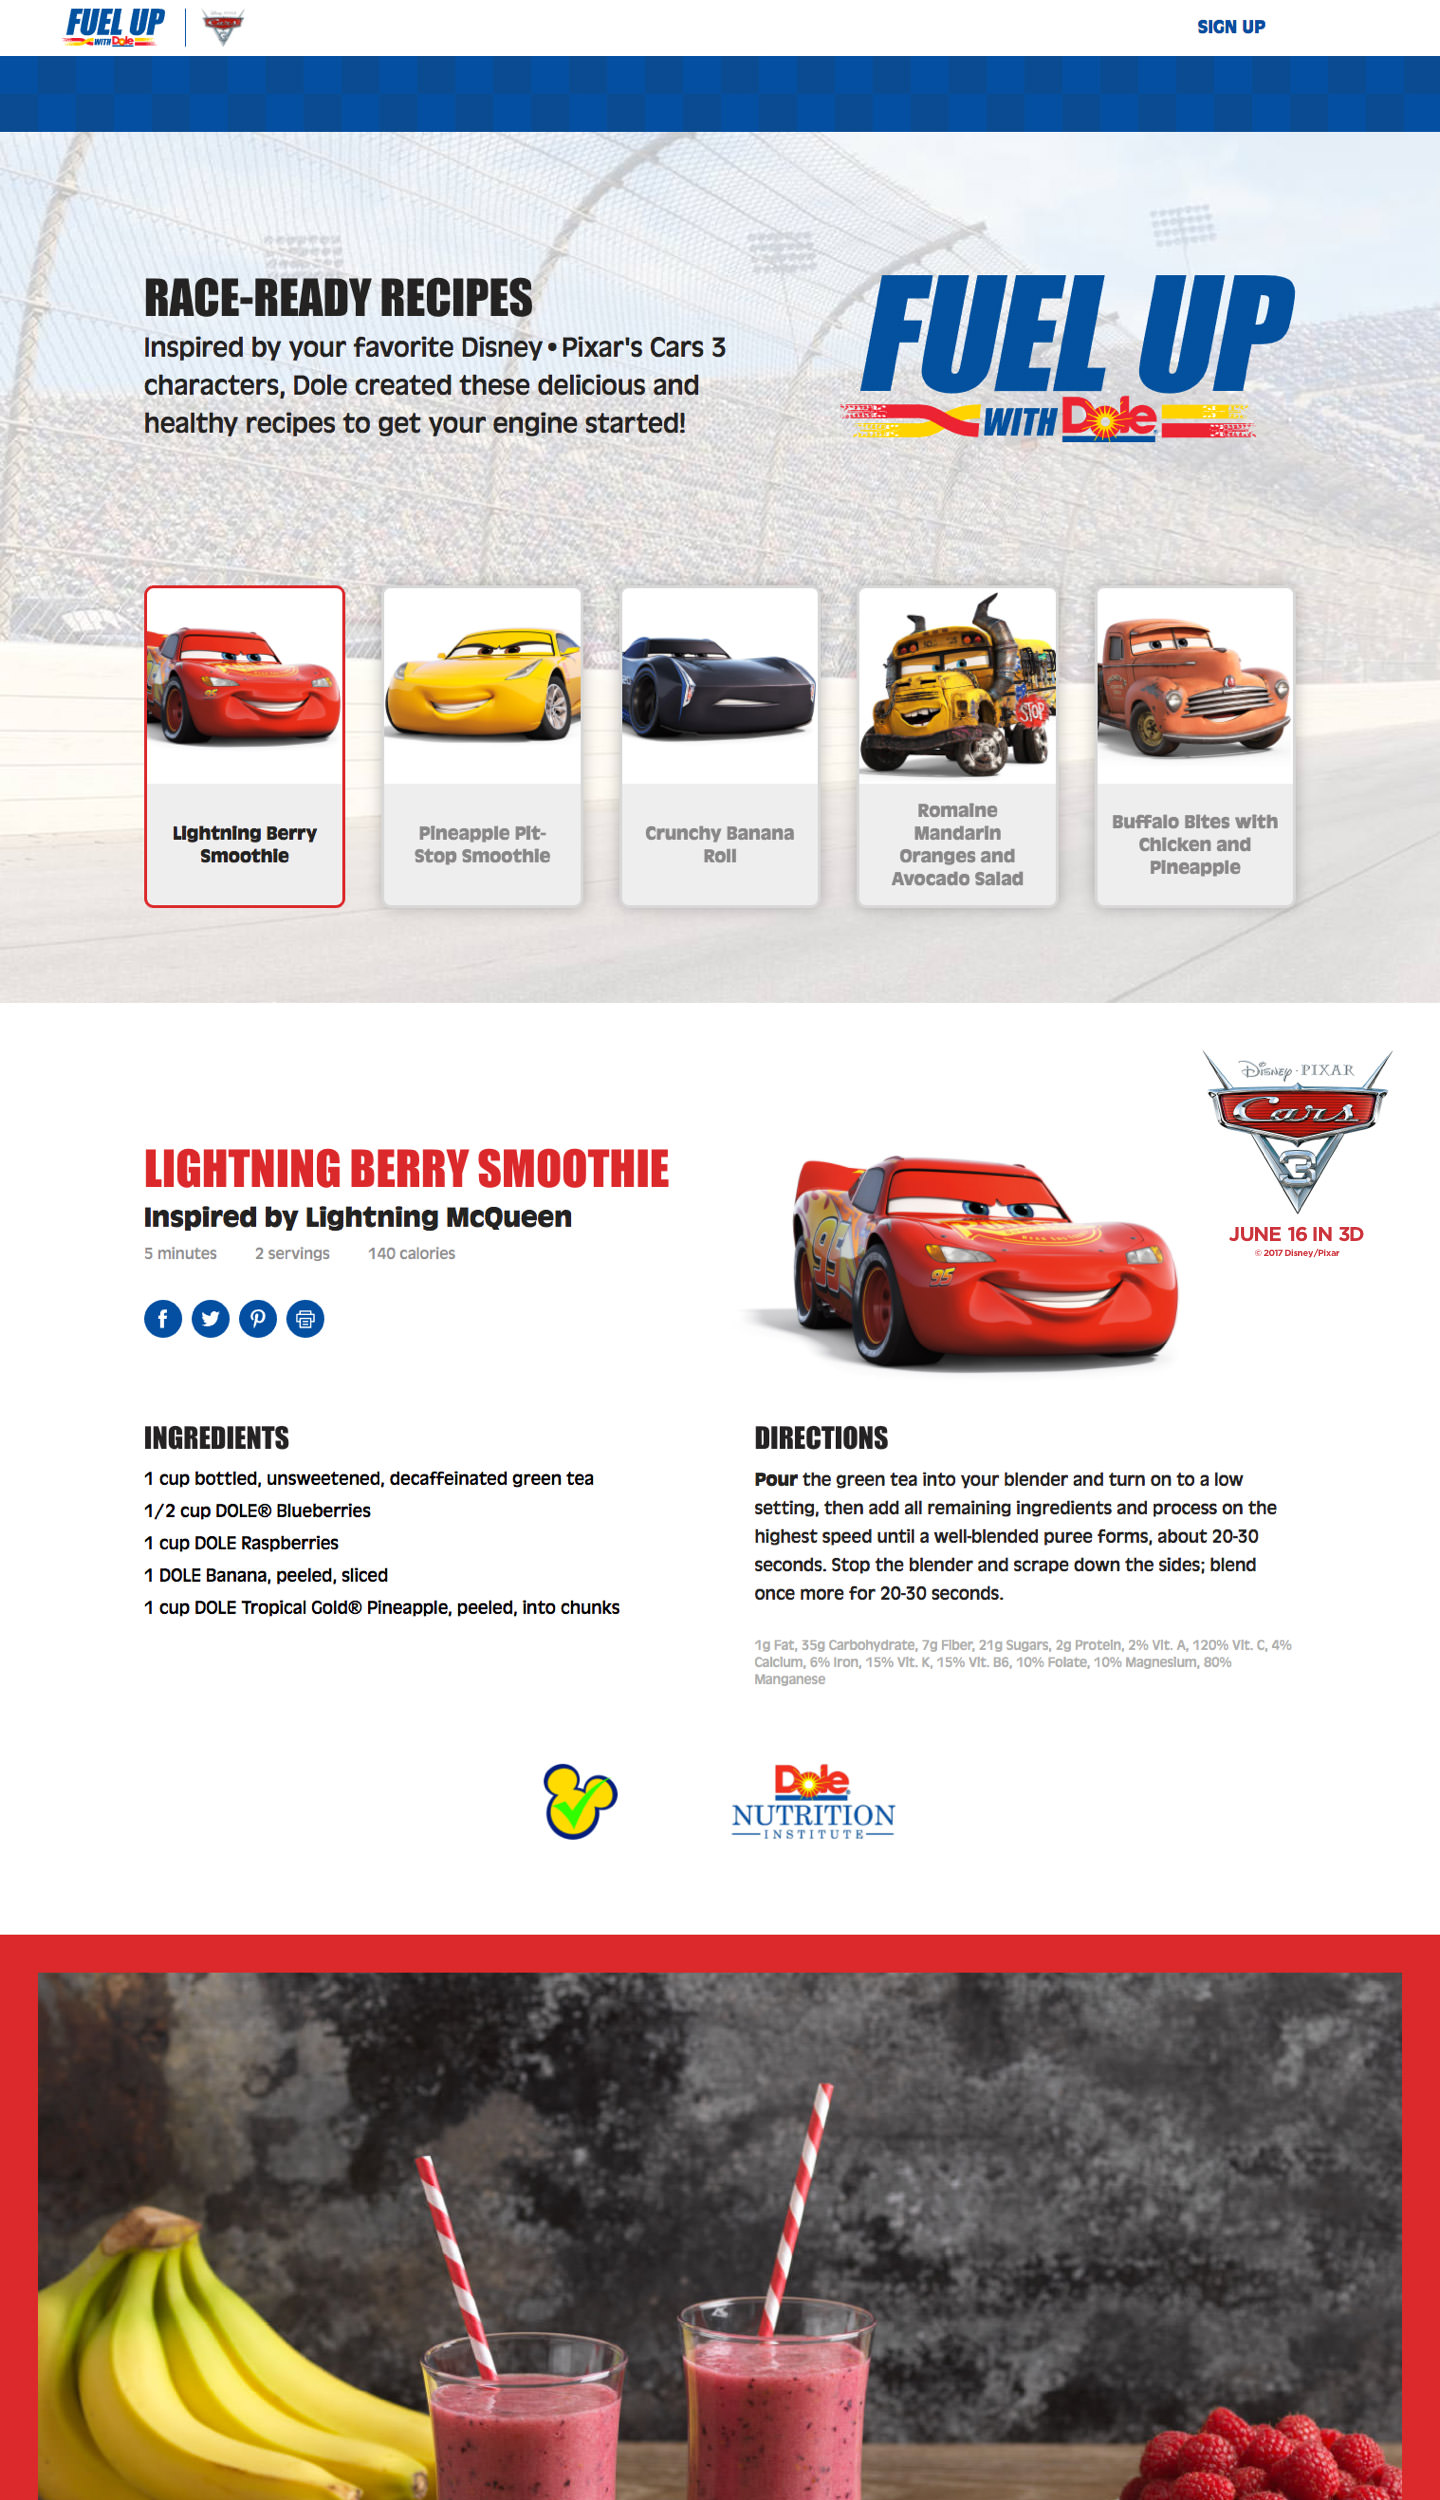 The Cars recipe page design as part of the Dole/Disney partnership